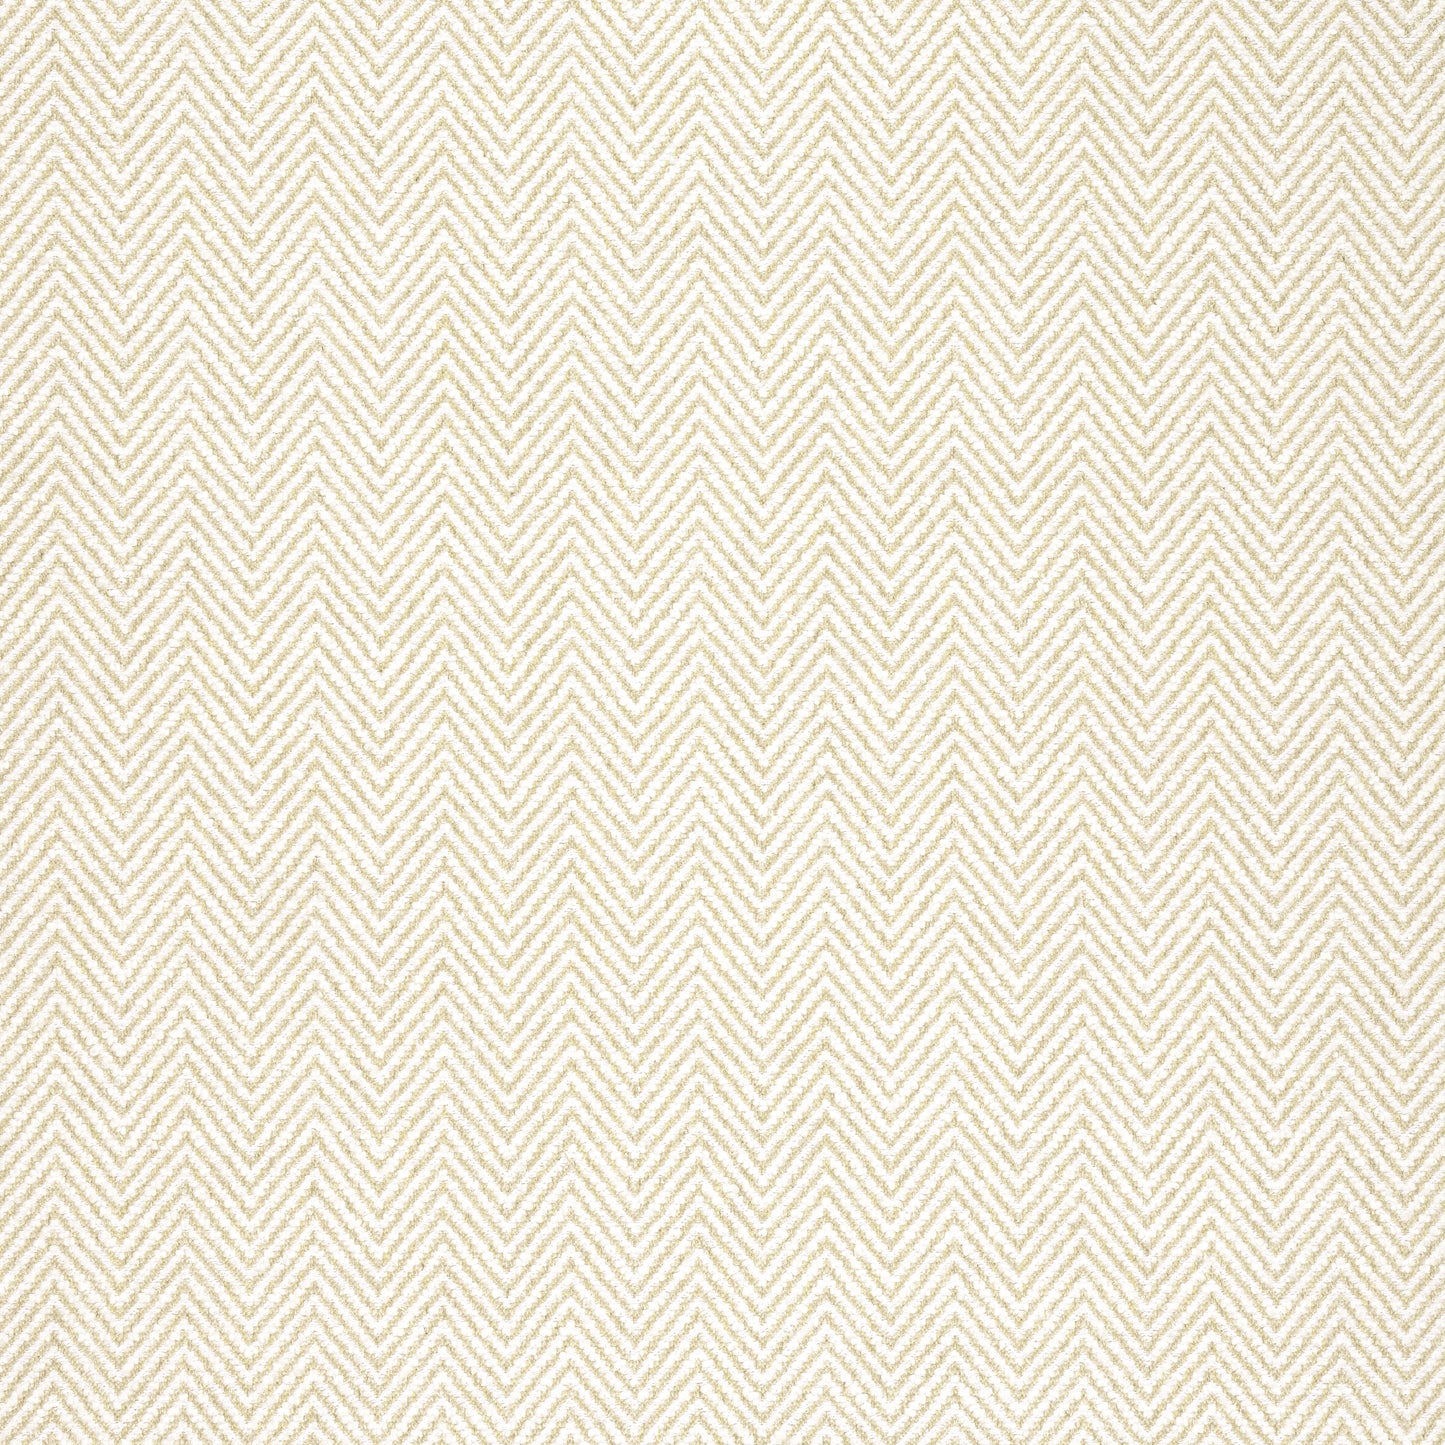 Purchase Thibaut Fabric Product W77123 pattern name Monviso color Parchment